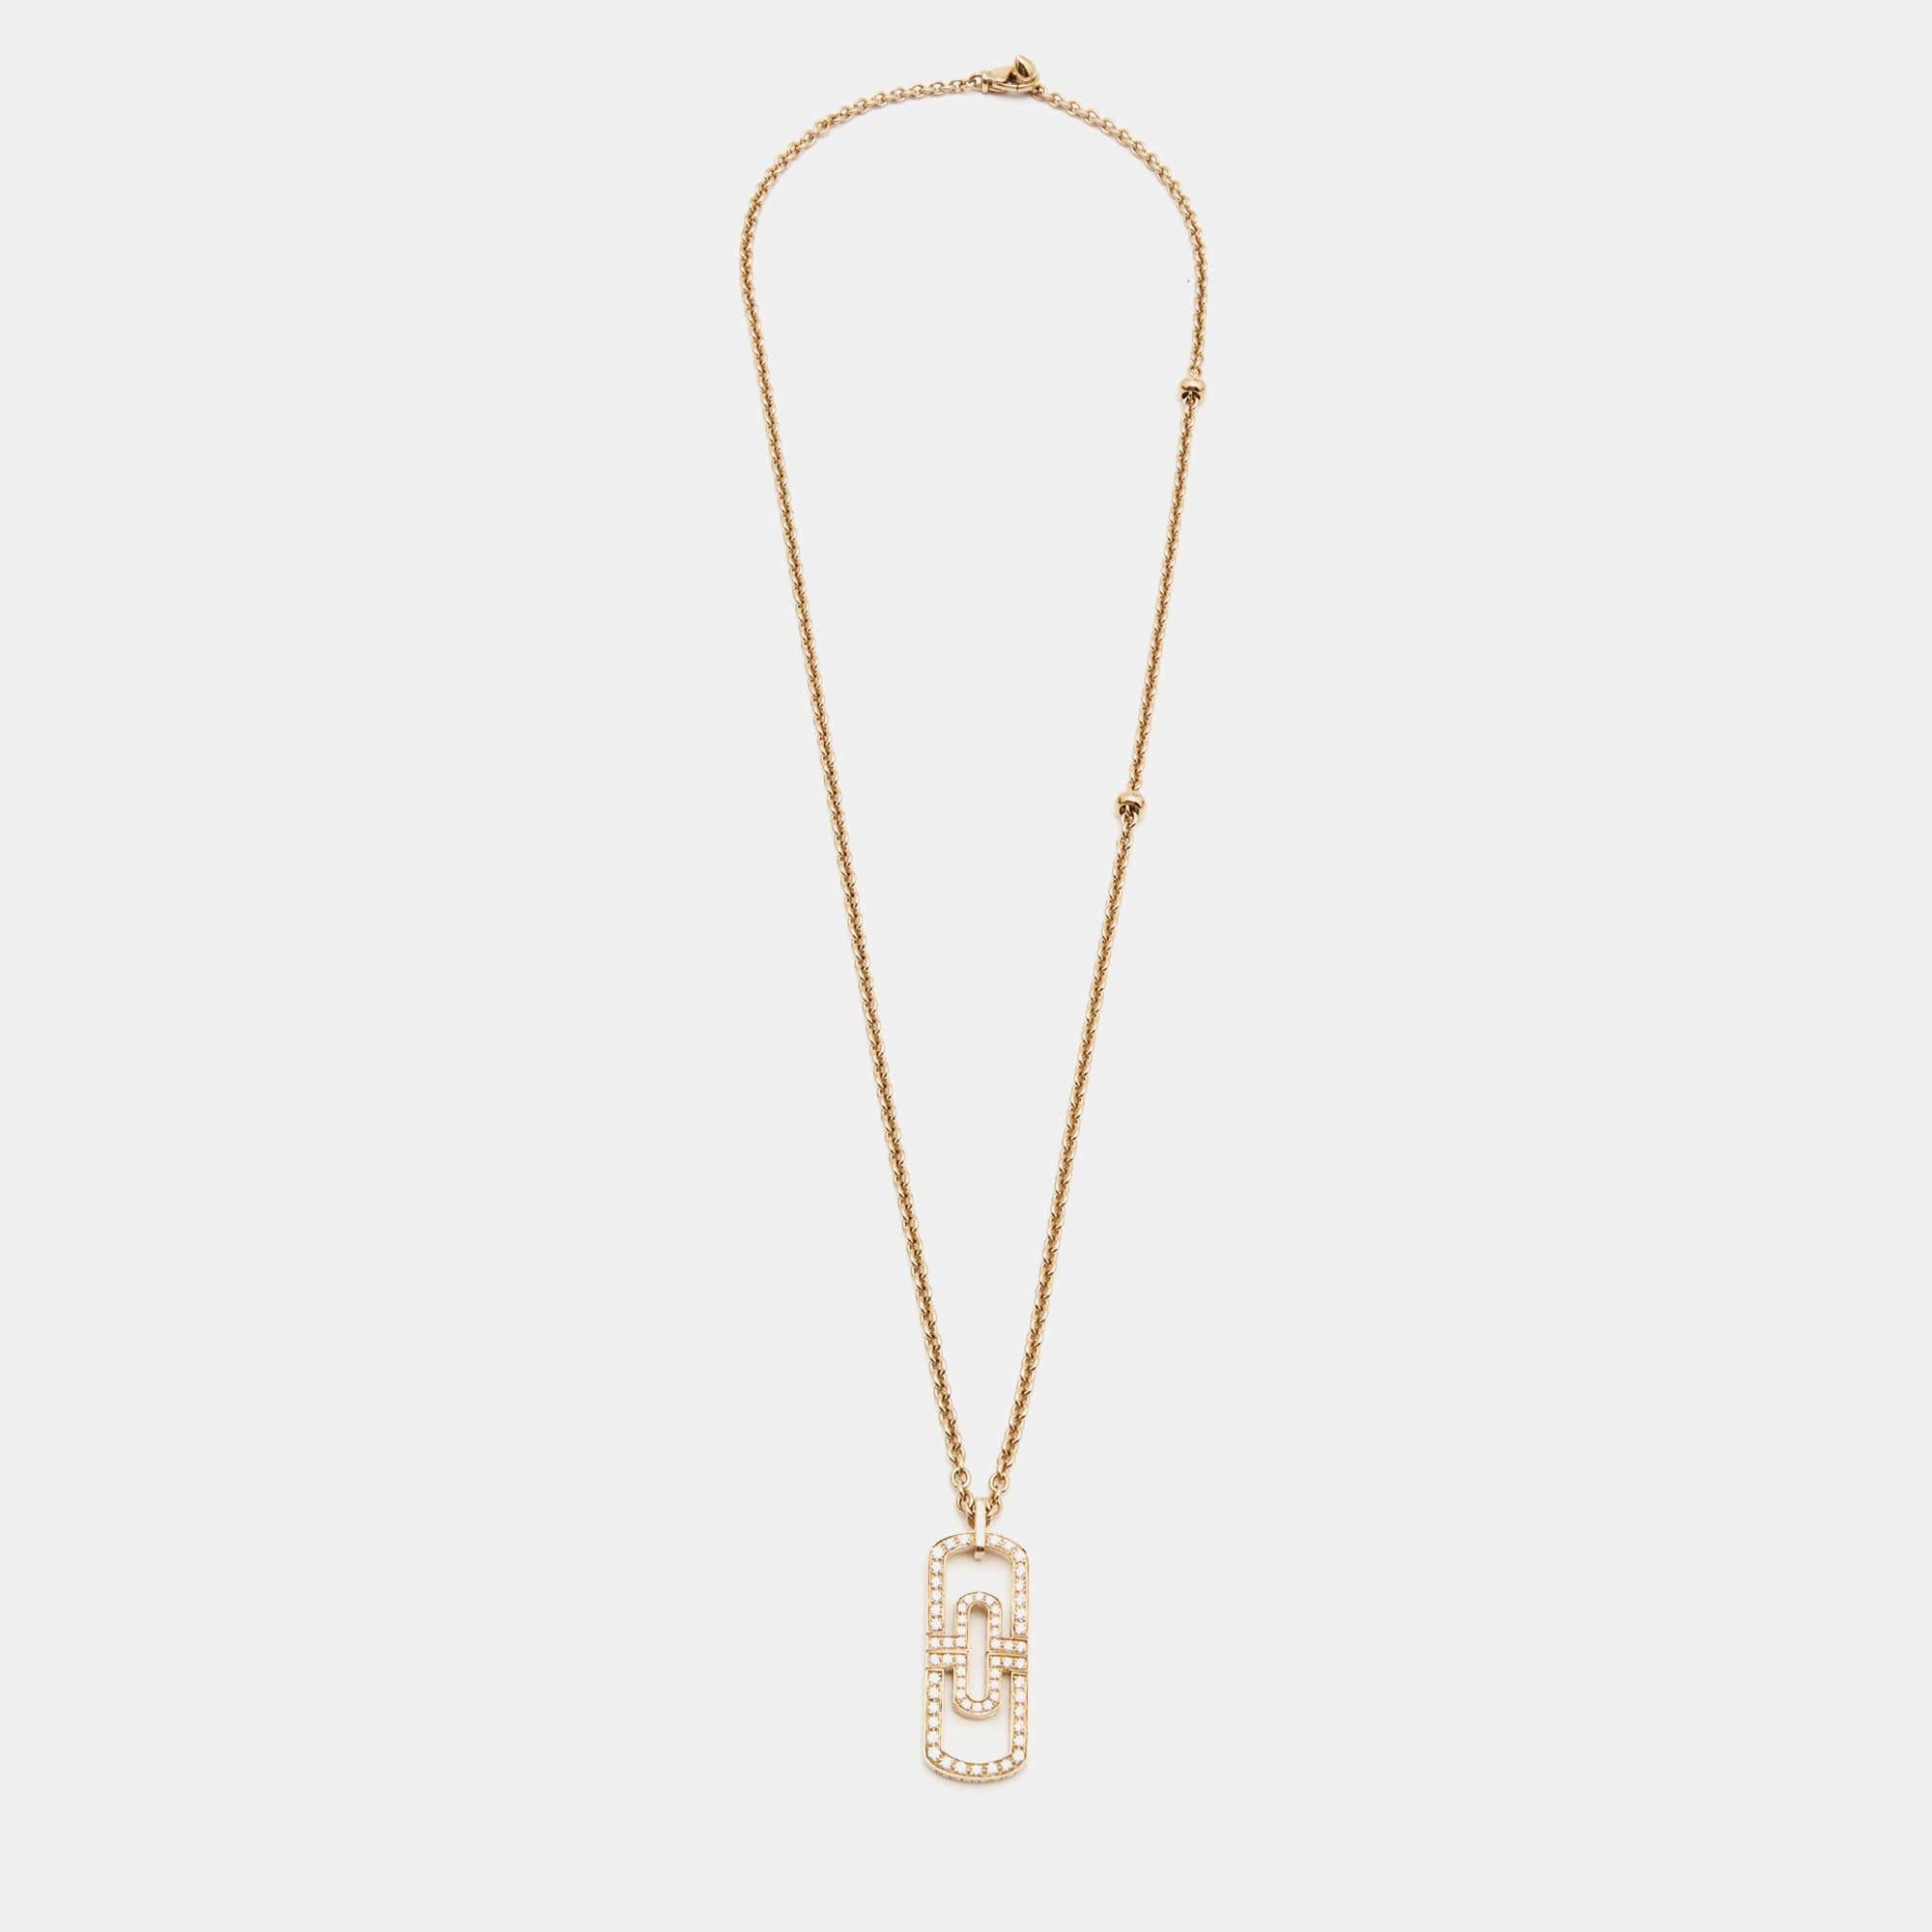 This Parentesi necklace from Bvlgari has a pendant characterized by strong geometric shapes set with shimmering diamonds. The necklace is sculpted from 18k rose gold to a smooth finish and is bound to offer an element of luxury to your ensemble for